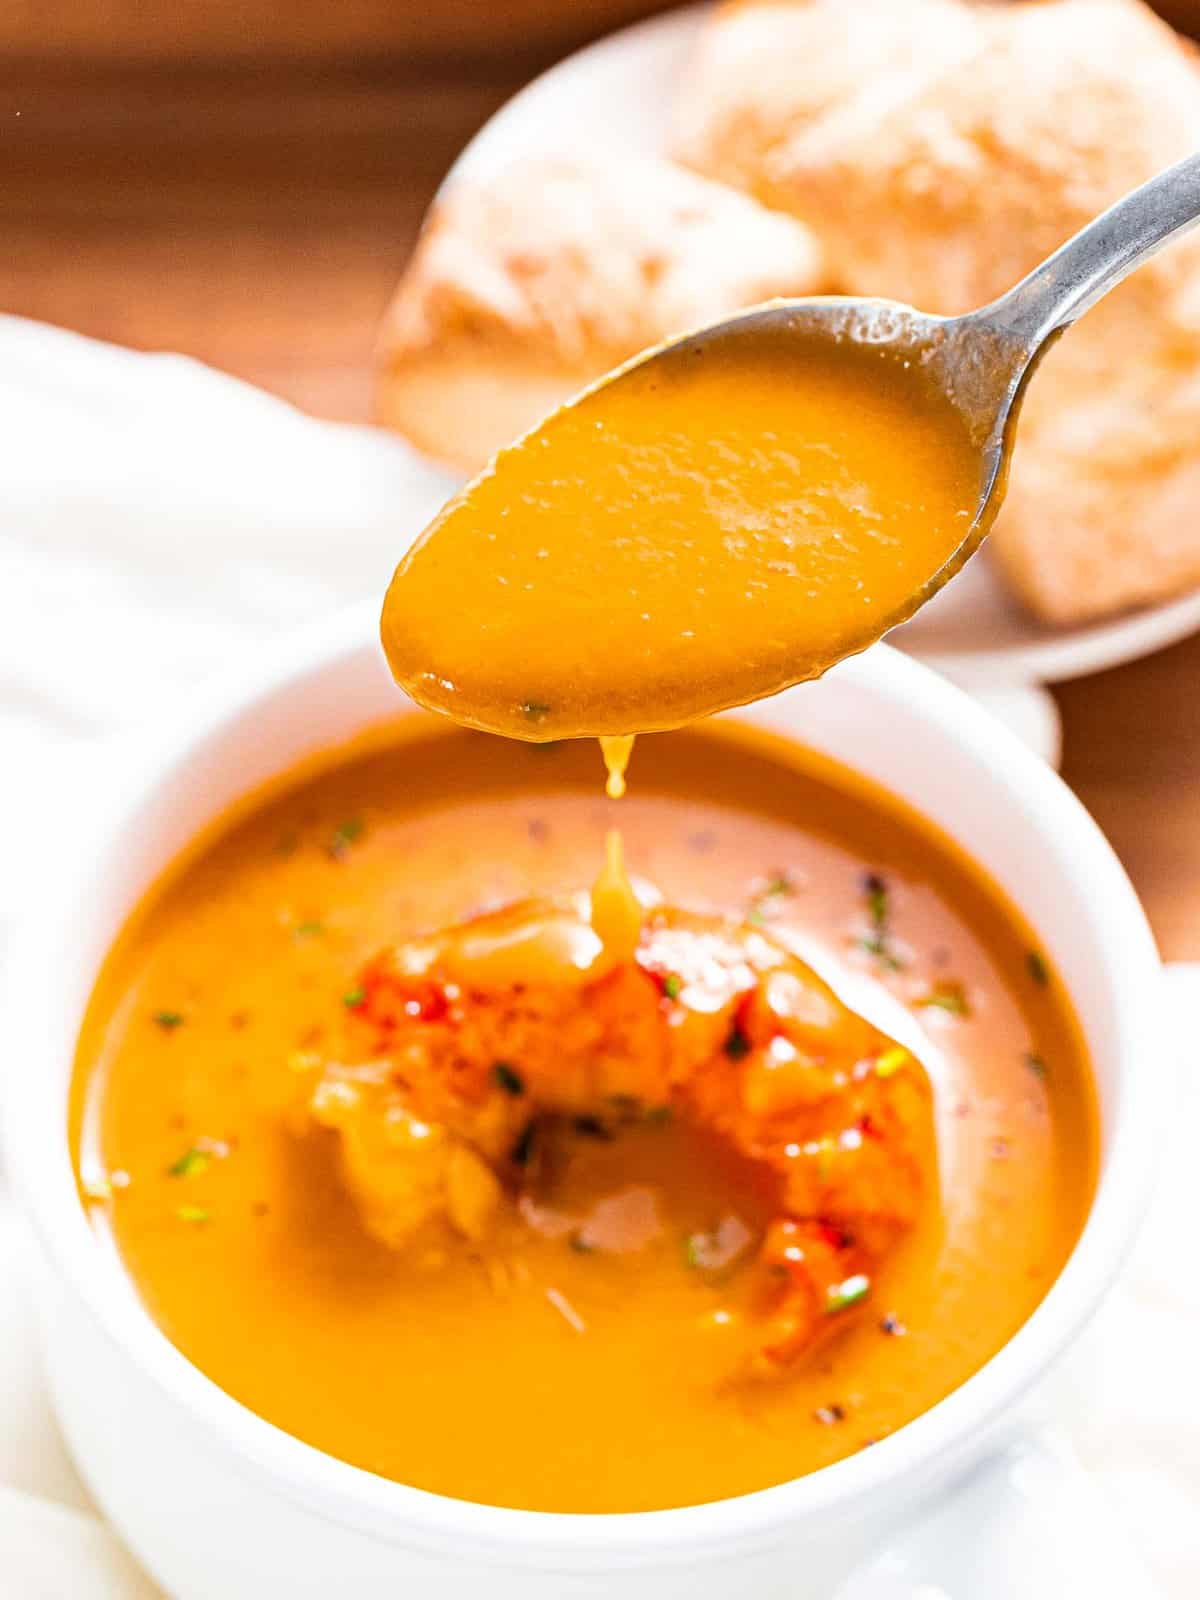 Smooth and creamy lobster bisque dripping off of a spoon.